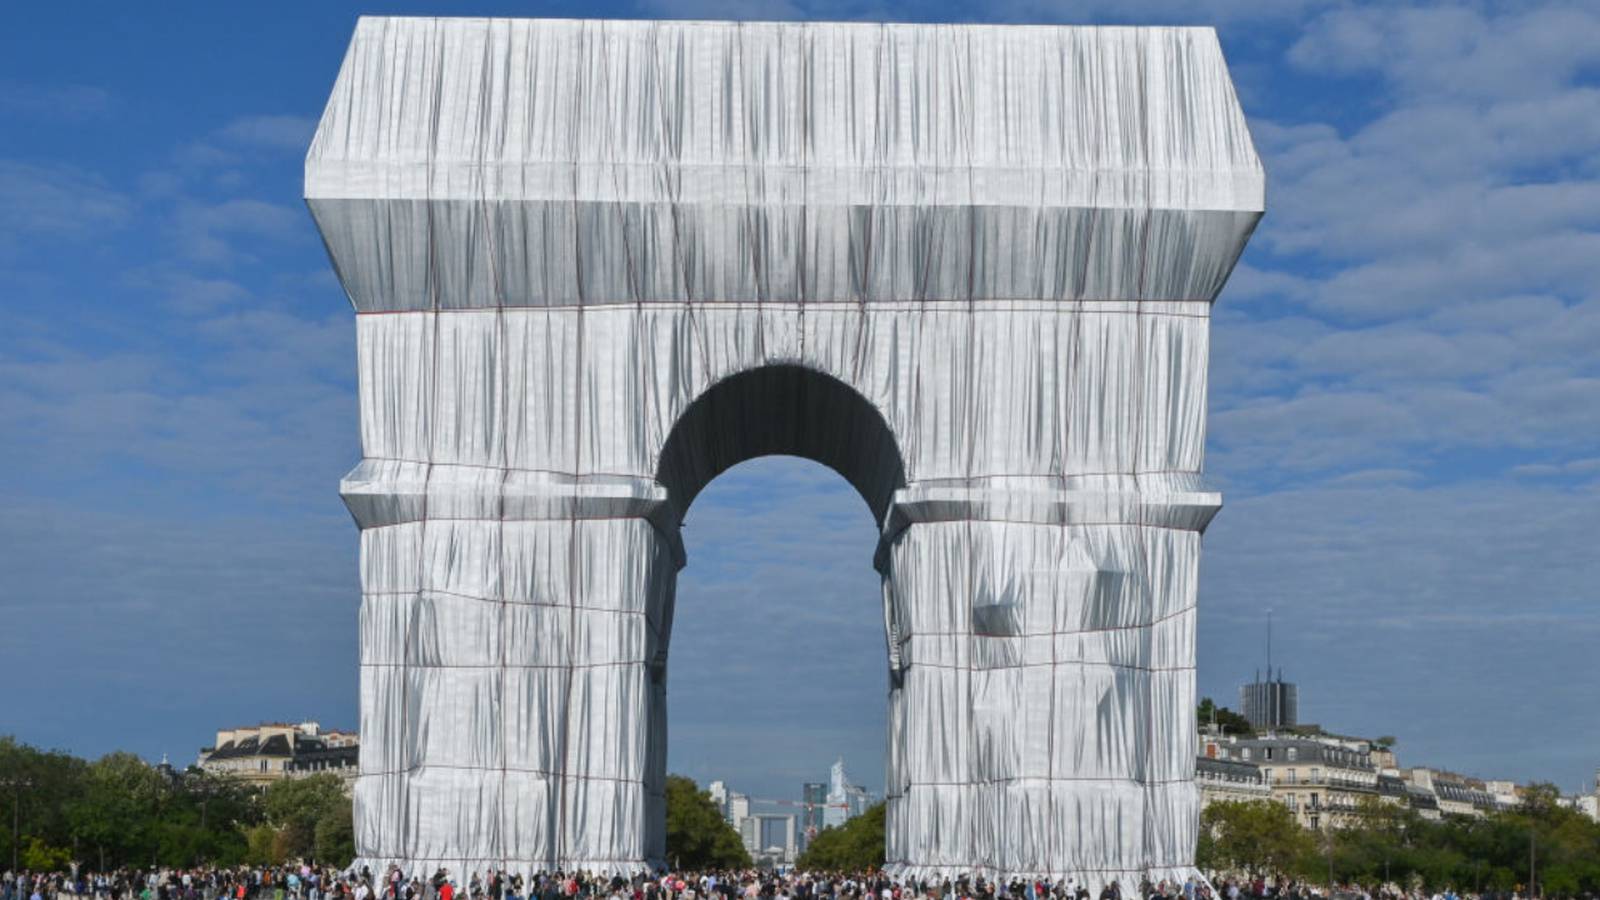 All wrapped up: Arc de Triomphe in Paris covered in fabric – KONO 101.1